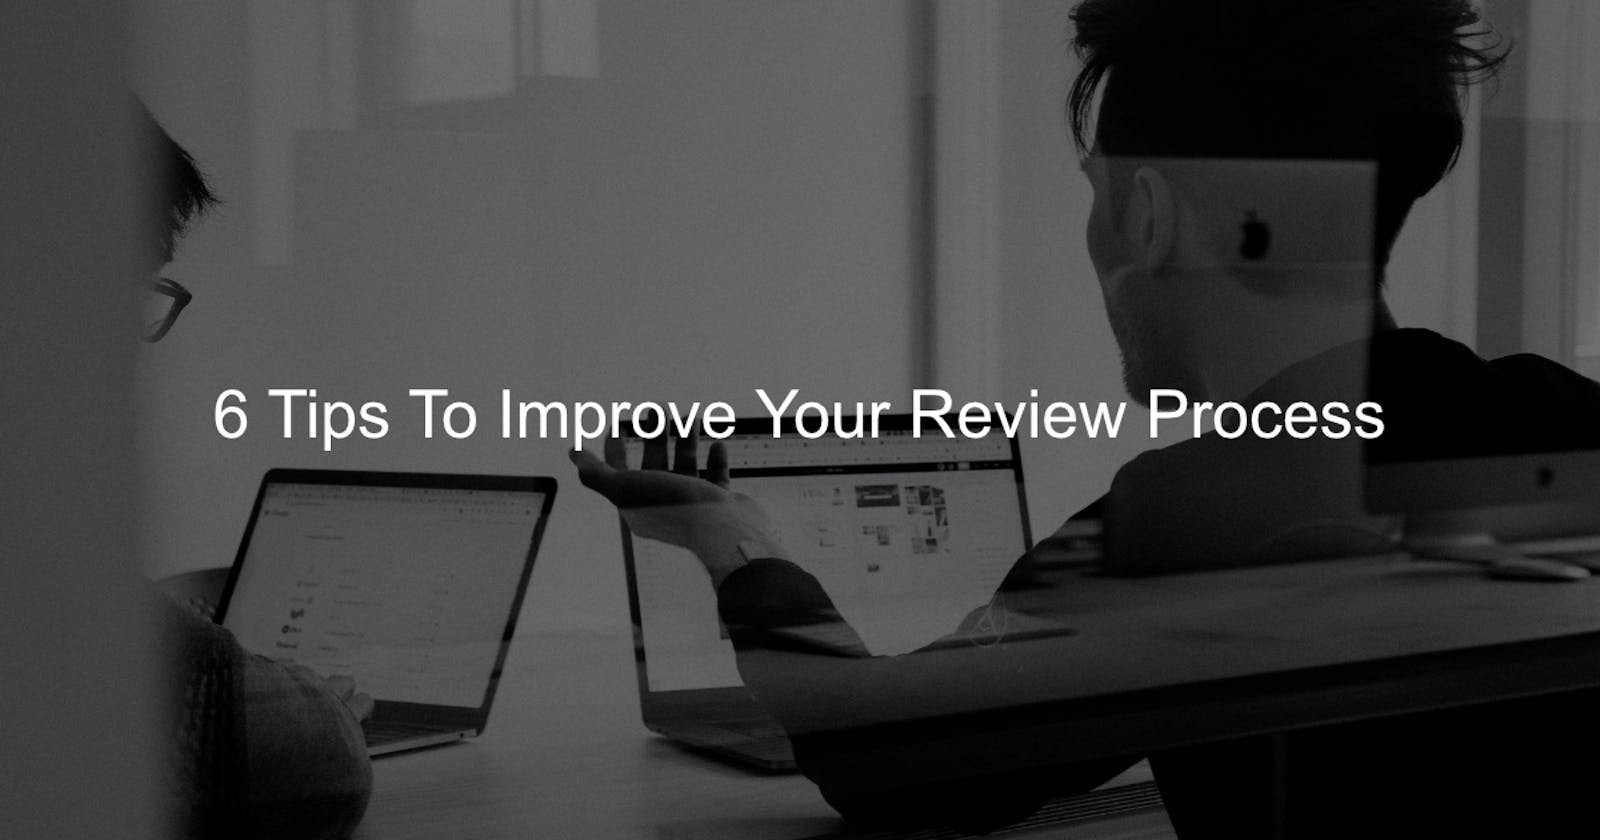 6 Tips To Improve Your Review Process